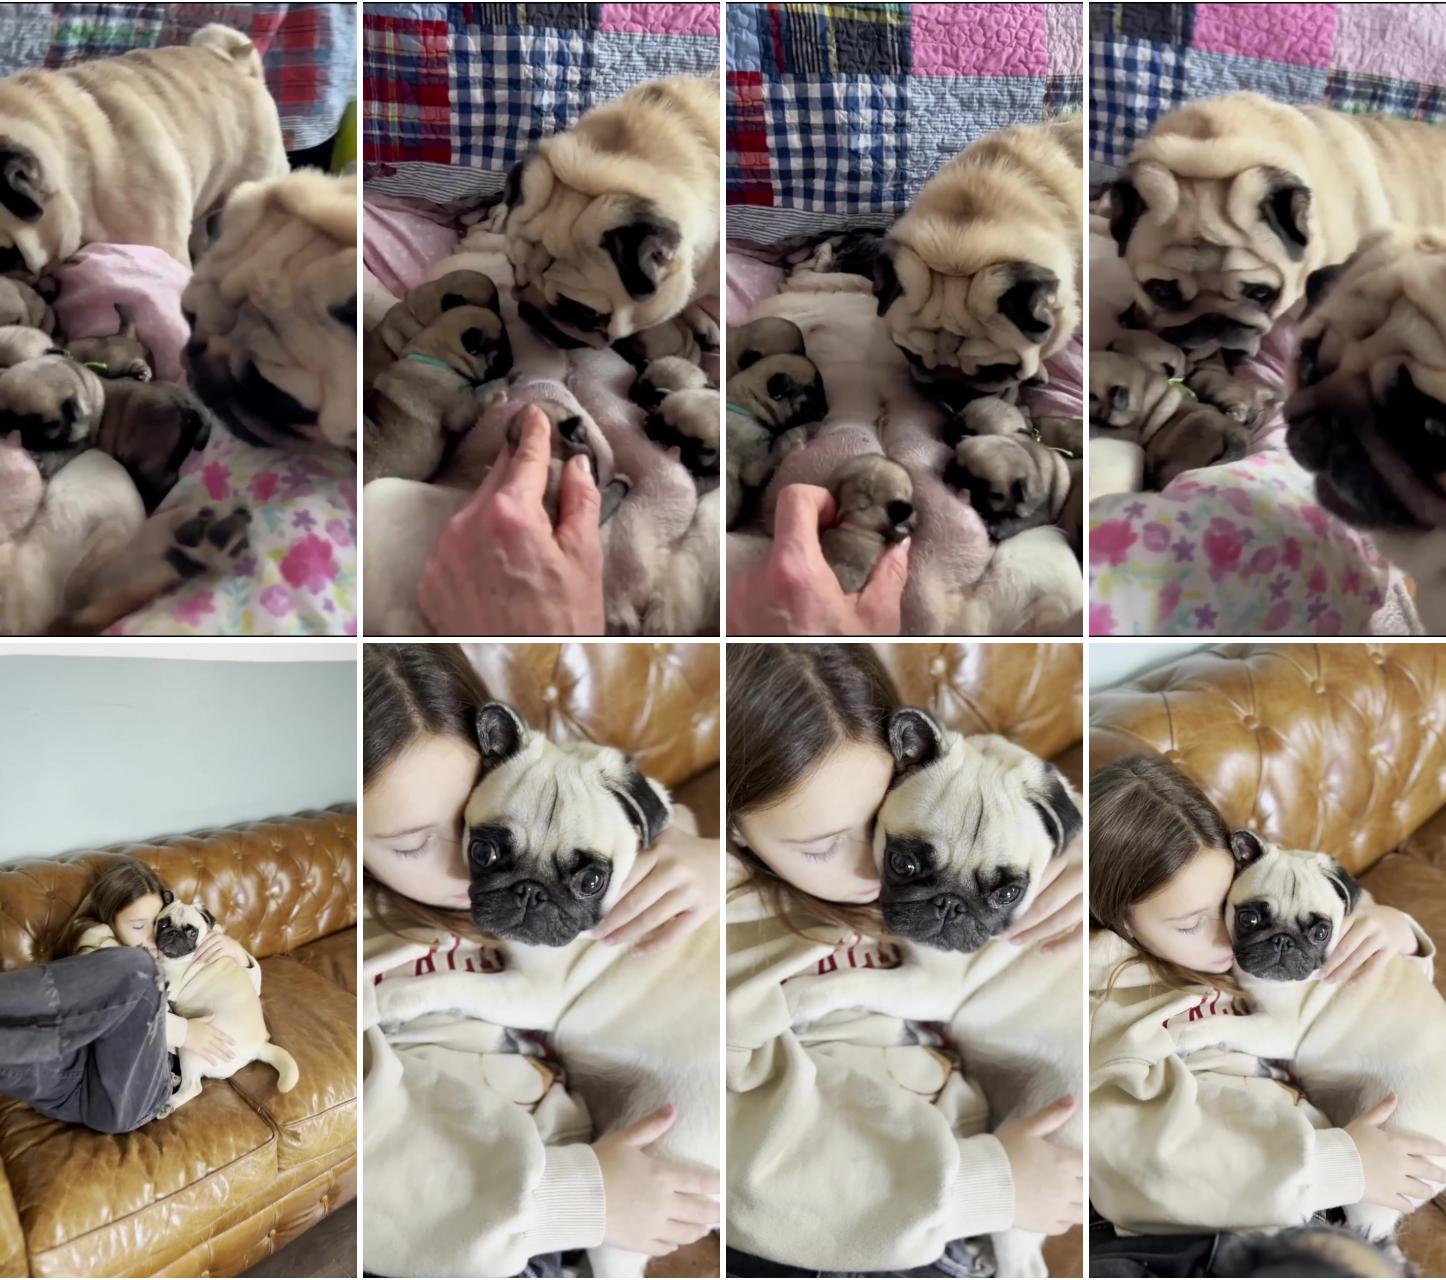 Missy, the winner of last year's laziest mom award, feels the need to stick her nose into lazy mom's; cute pug video